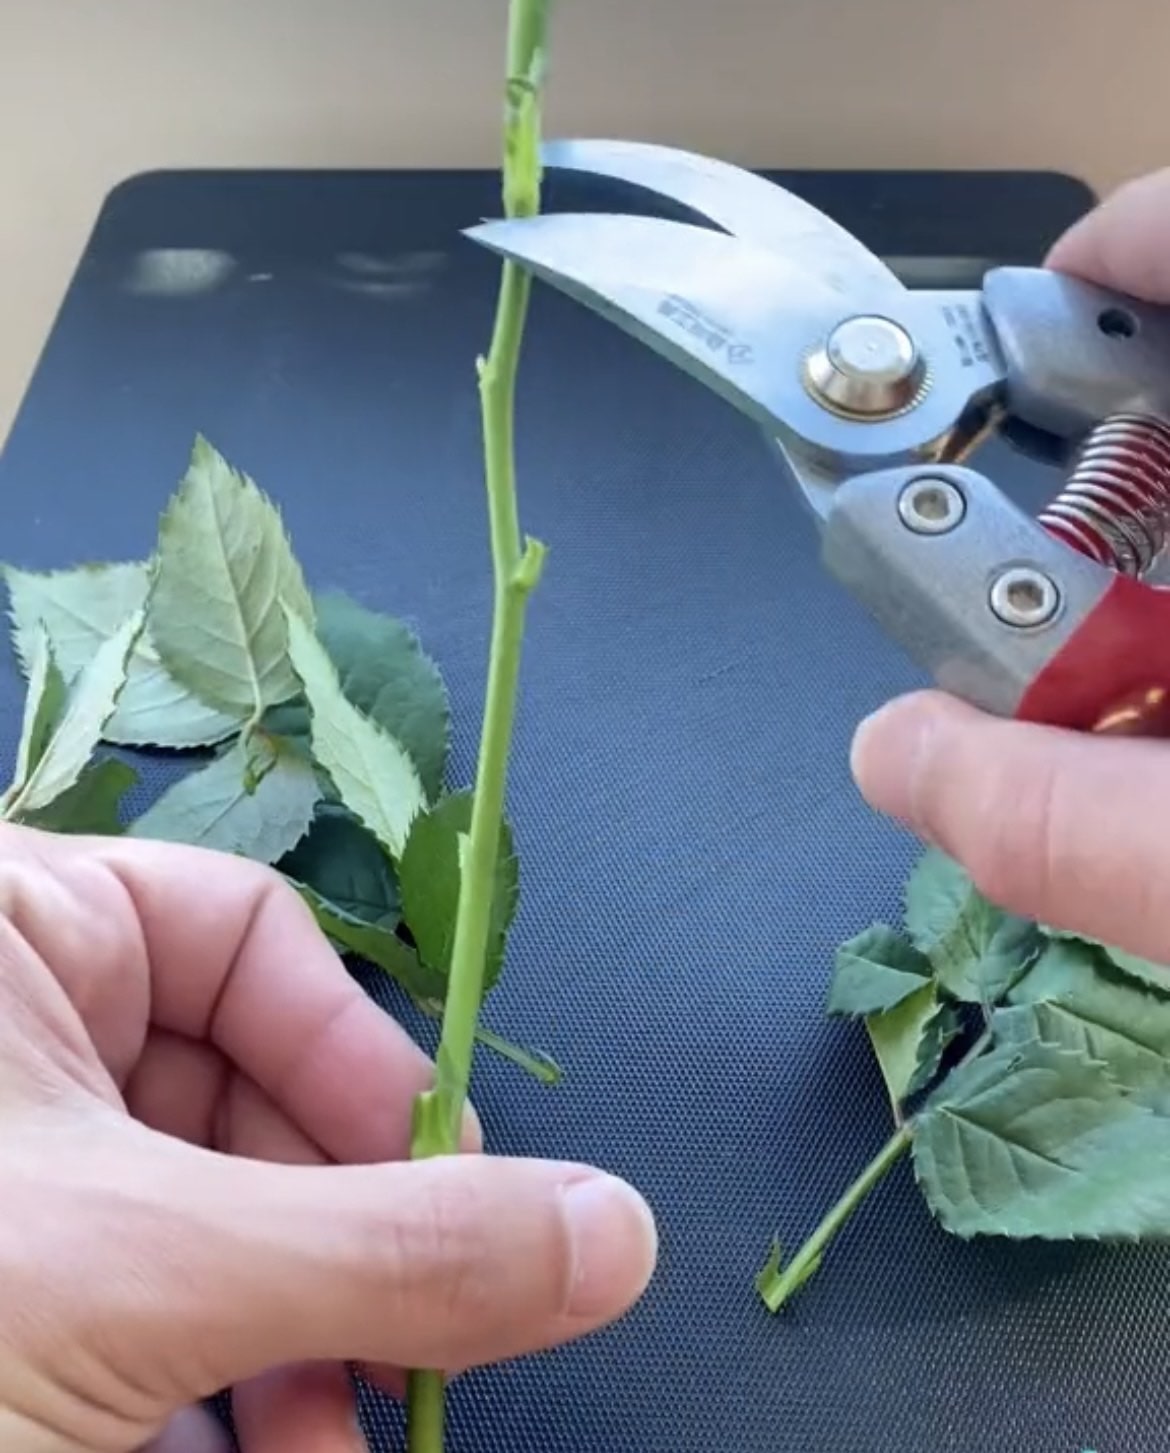 Trimming a rose